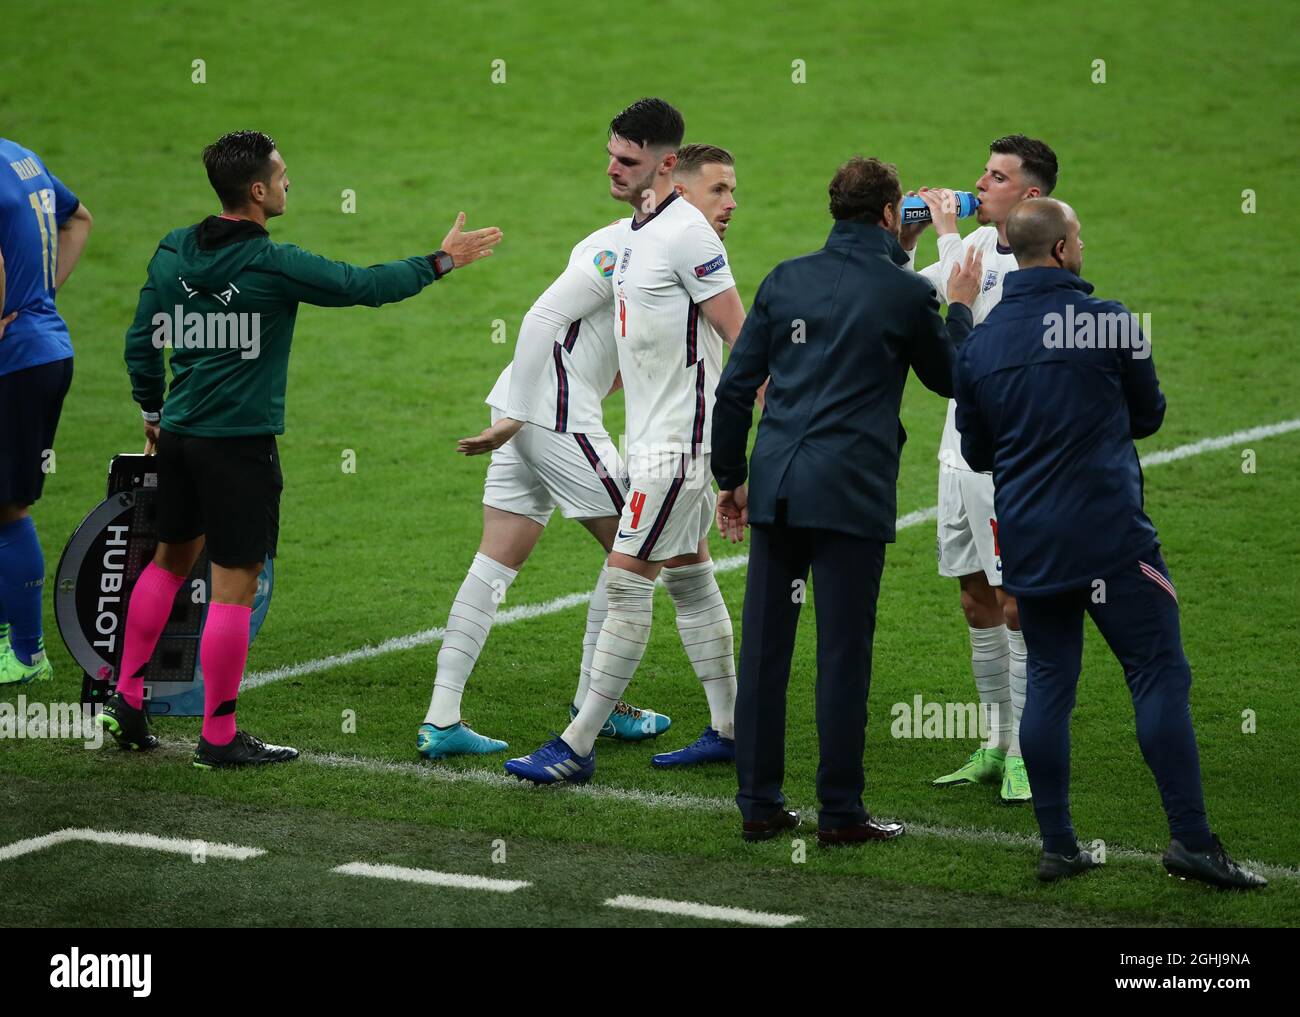 London, England, 11th July 2021. Declan Rice of England replaced by Jordan Henderson of England during the UEFA Euro 2020 final at Wembley Stadium, London. Picture credit should read: David Klein / Sportimage via PA Images Stock Photo